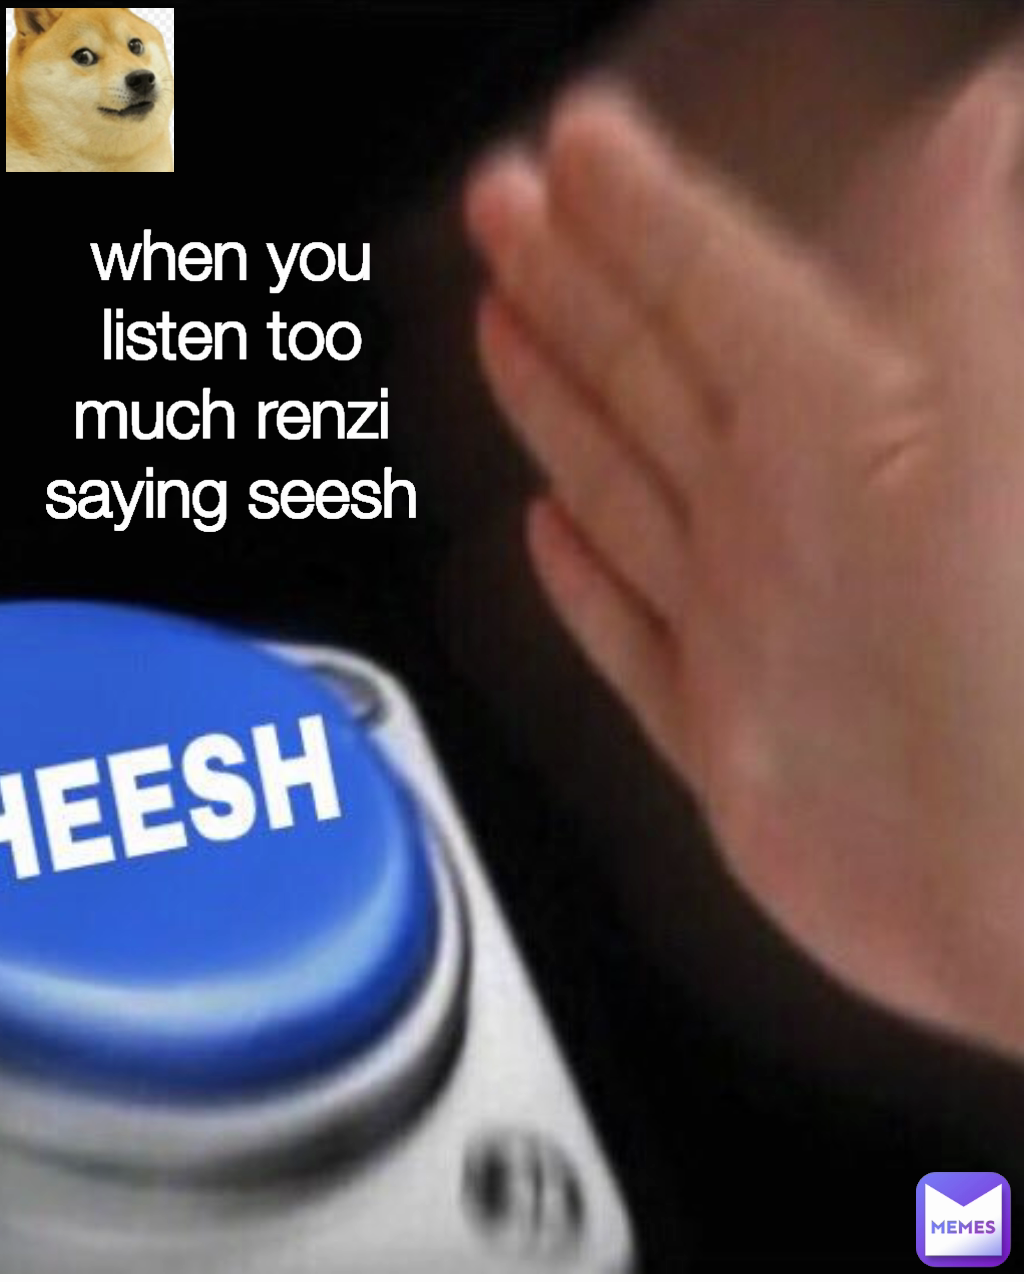 Type Text when you listen too much renzi saying seesh